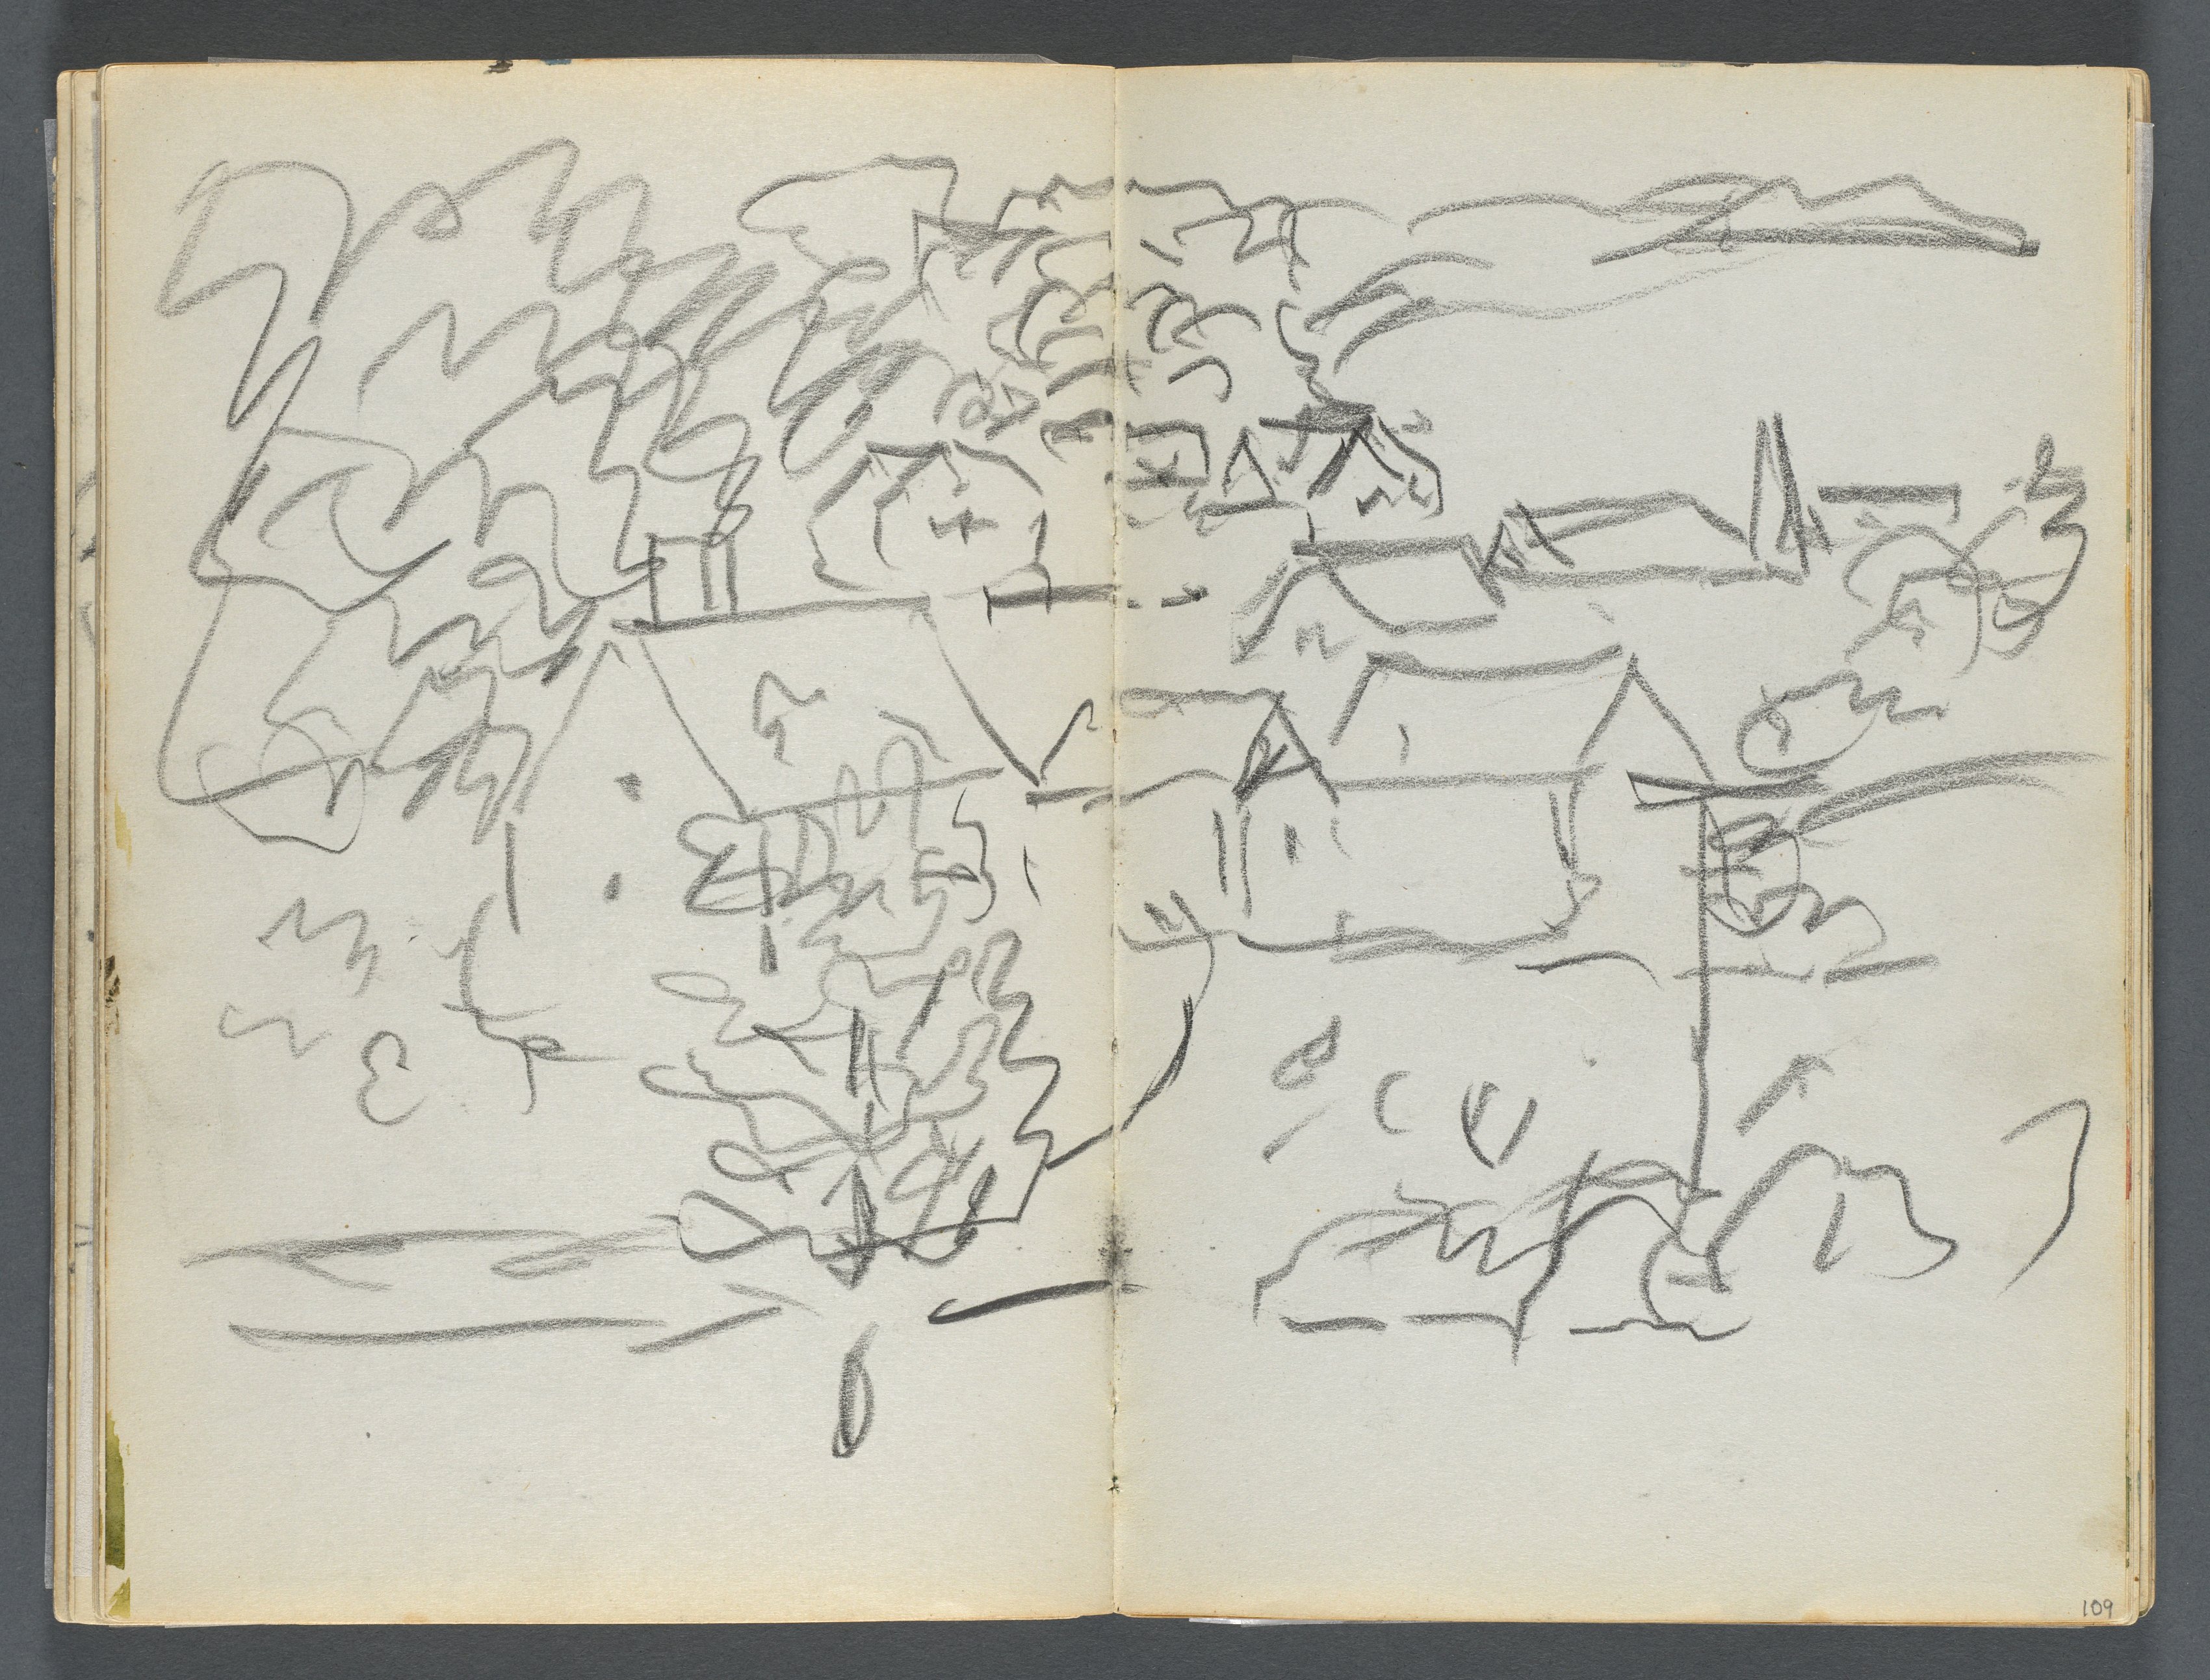 Sketchbook, The Dells, N° 127, page 108 & 109: Landscape with Houses